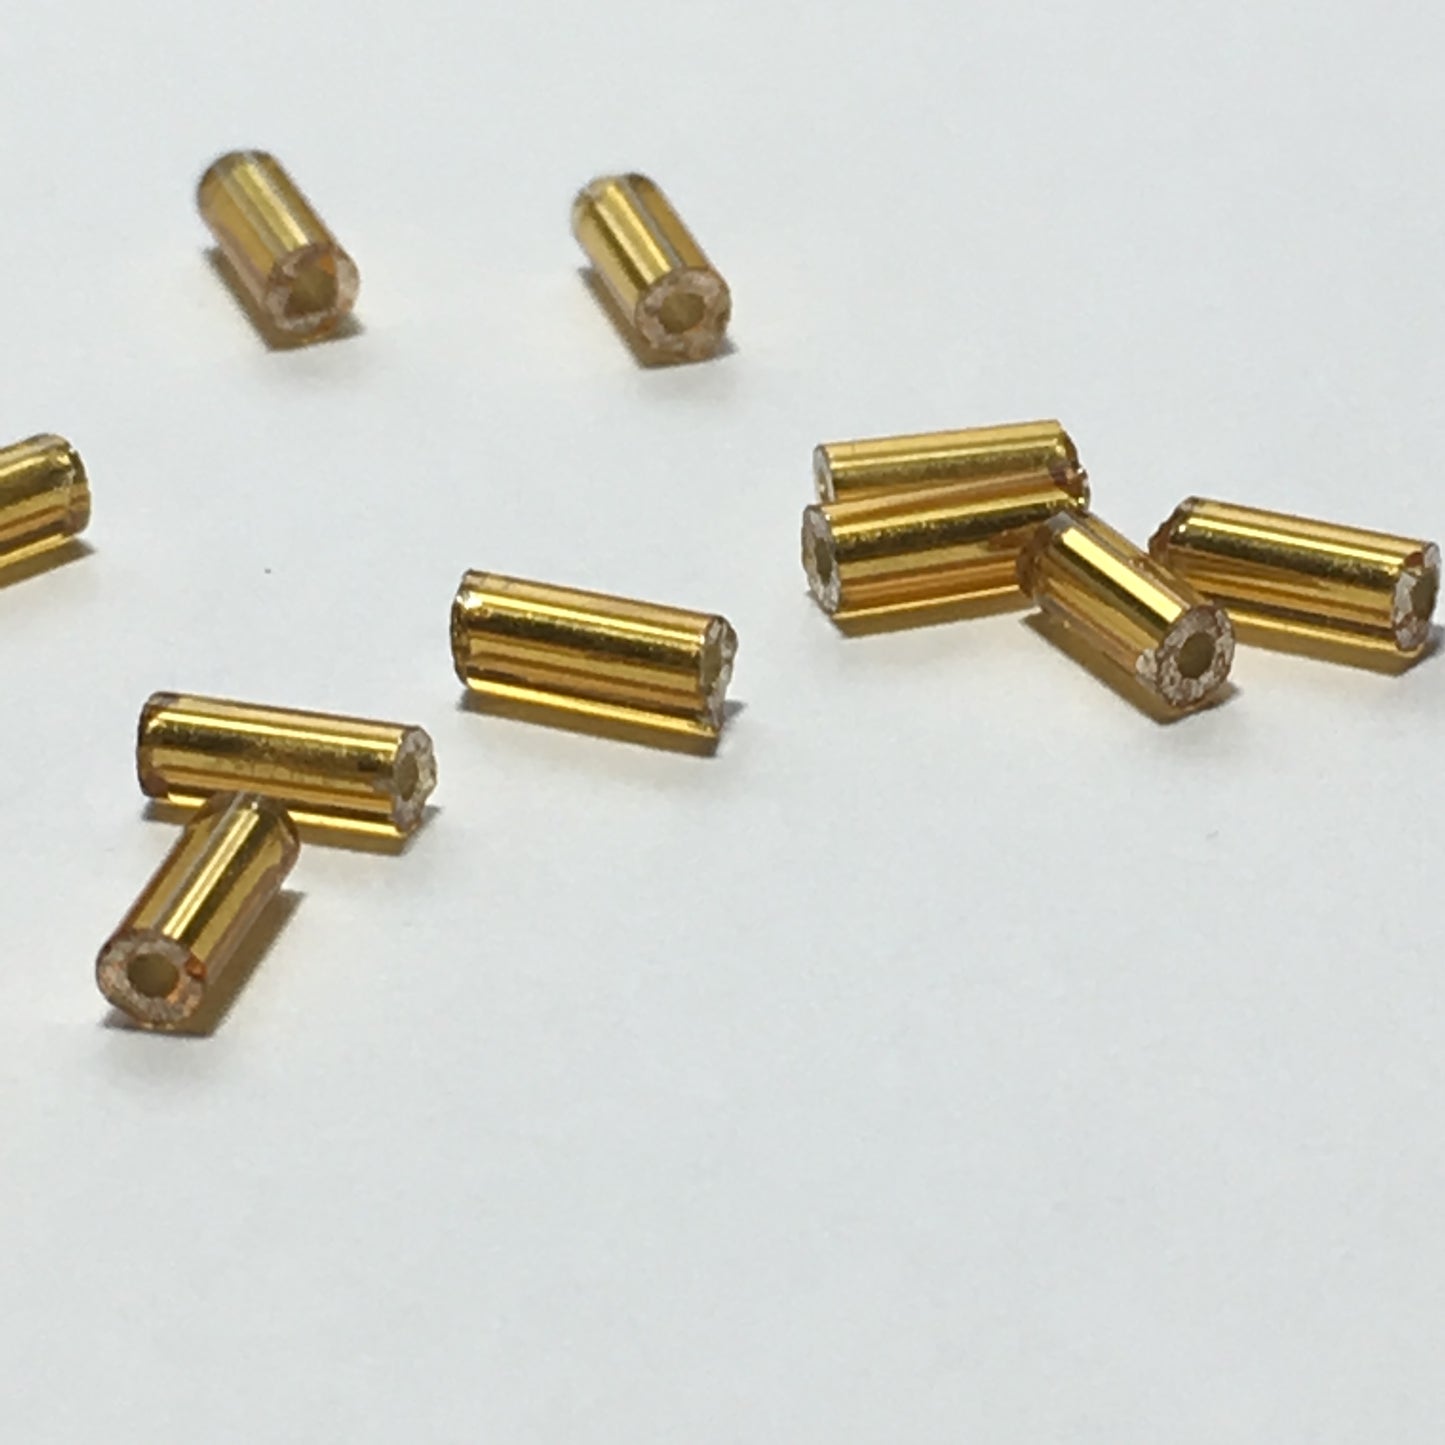 Transparent Gold Silver Lined Glass Bugle Beads, 5 mm, 5 or 10 gm